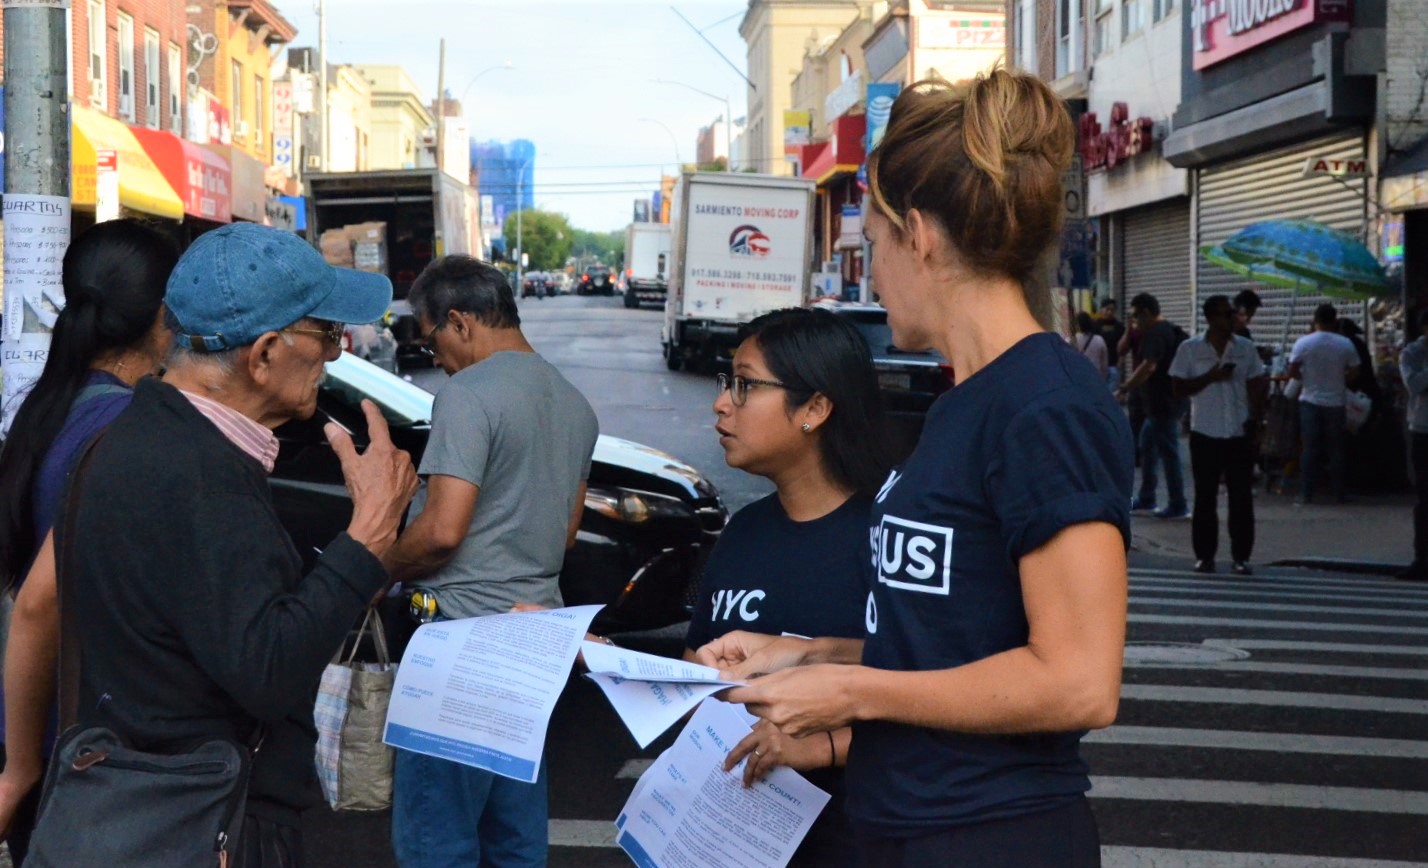 Two people wearing census shirts talking with an older gentleman on a street.